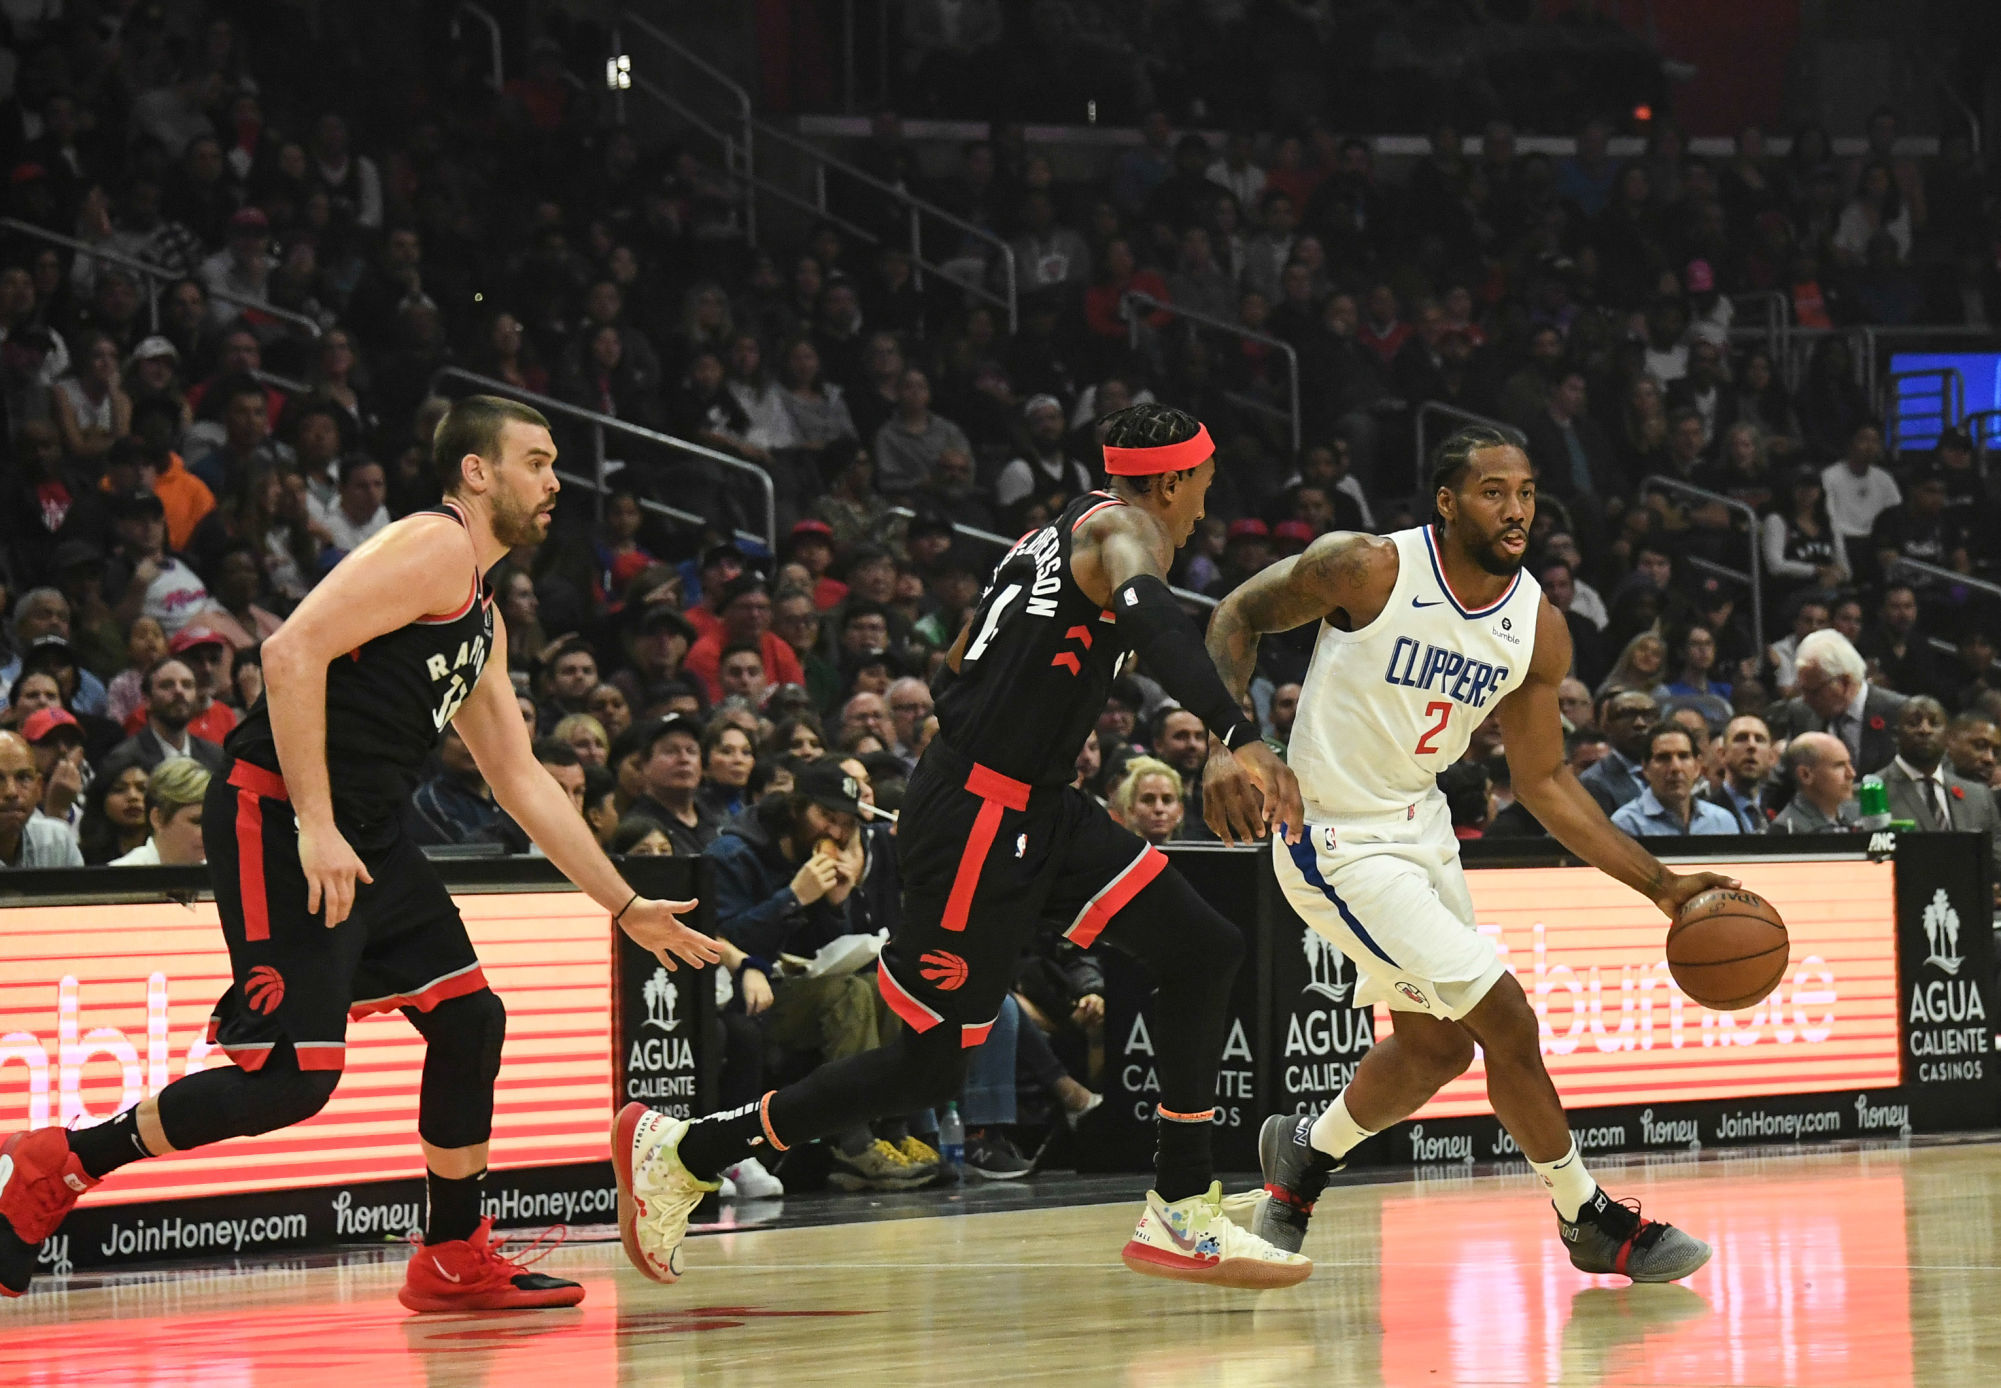 Nov 11, 2019; Los Angeles, CA, USA; LA Clippers forward Kawhi Leonard (2) dribbles the ball defended by Toronto Raptors forward Rondae Hollis-Jefferson (4) and center Marc Gasol (33) during the first half at Staples Center. Mandatory Credit: Richard Mackson-USA TODAY Sports/Sipa USA 

Photo by Icon Sport - Marc GASOL - Kawhi LEONARD - Rondae HOLLIS-JEFFERSON - Staples Center - Los Angeles (Etats Unis)